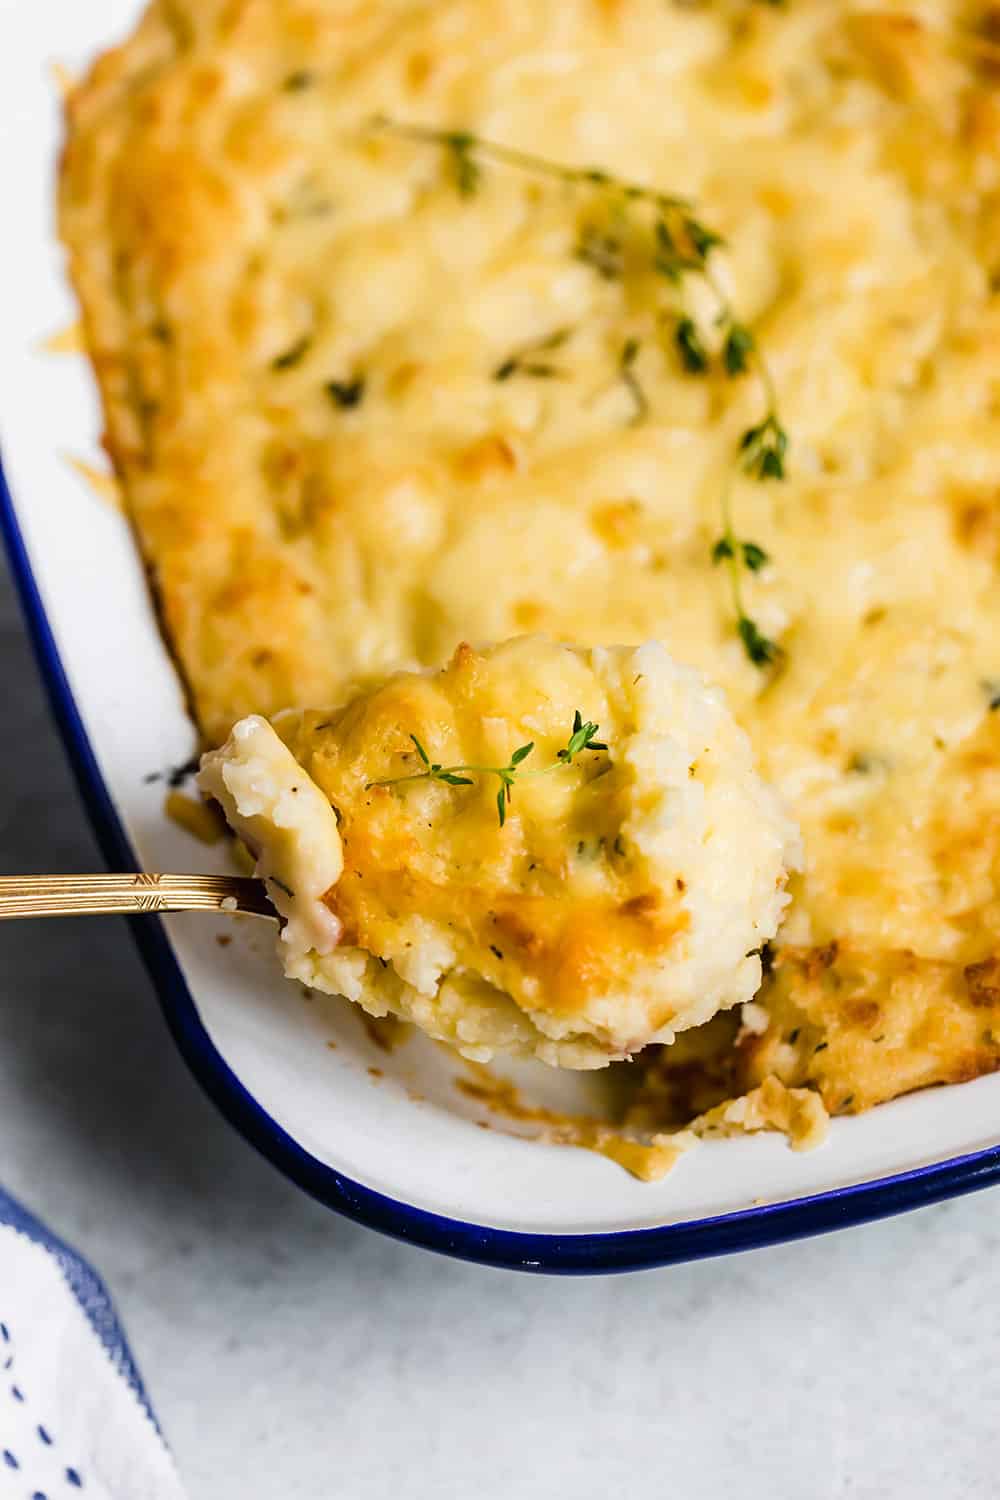 A spoon scooping baked mashed potatoes out of a casserole dish.